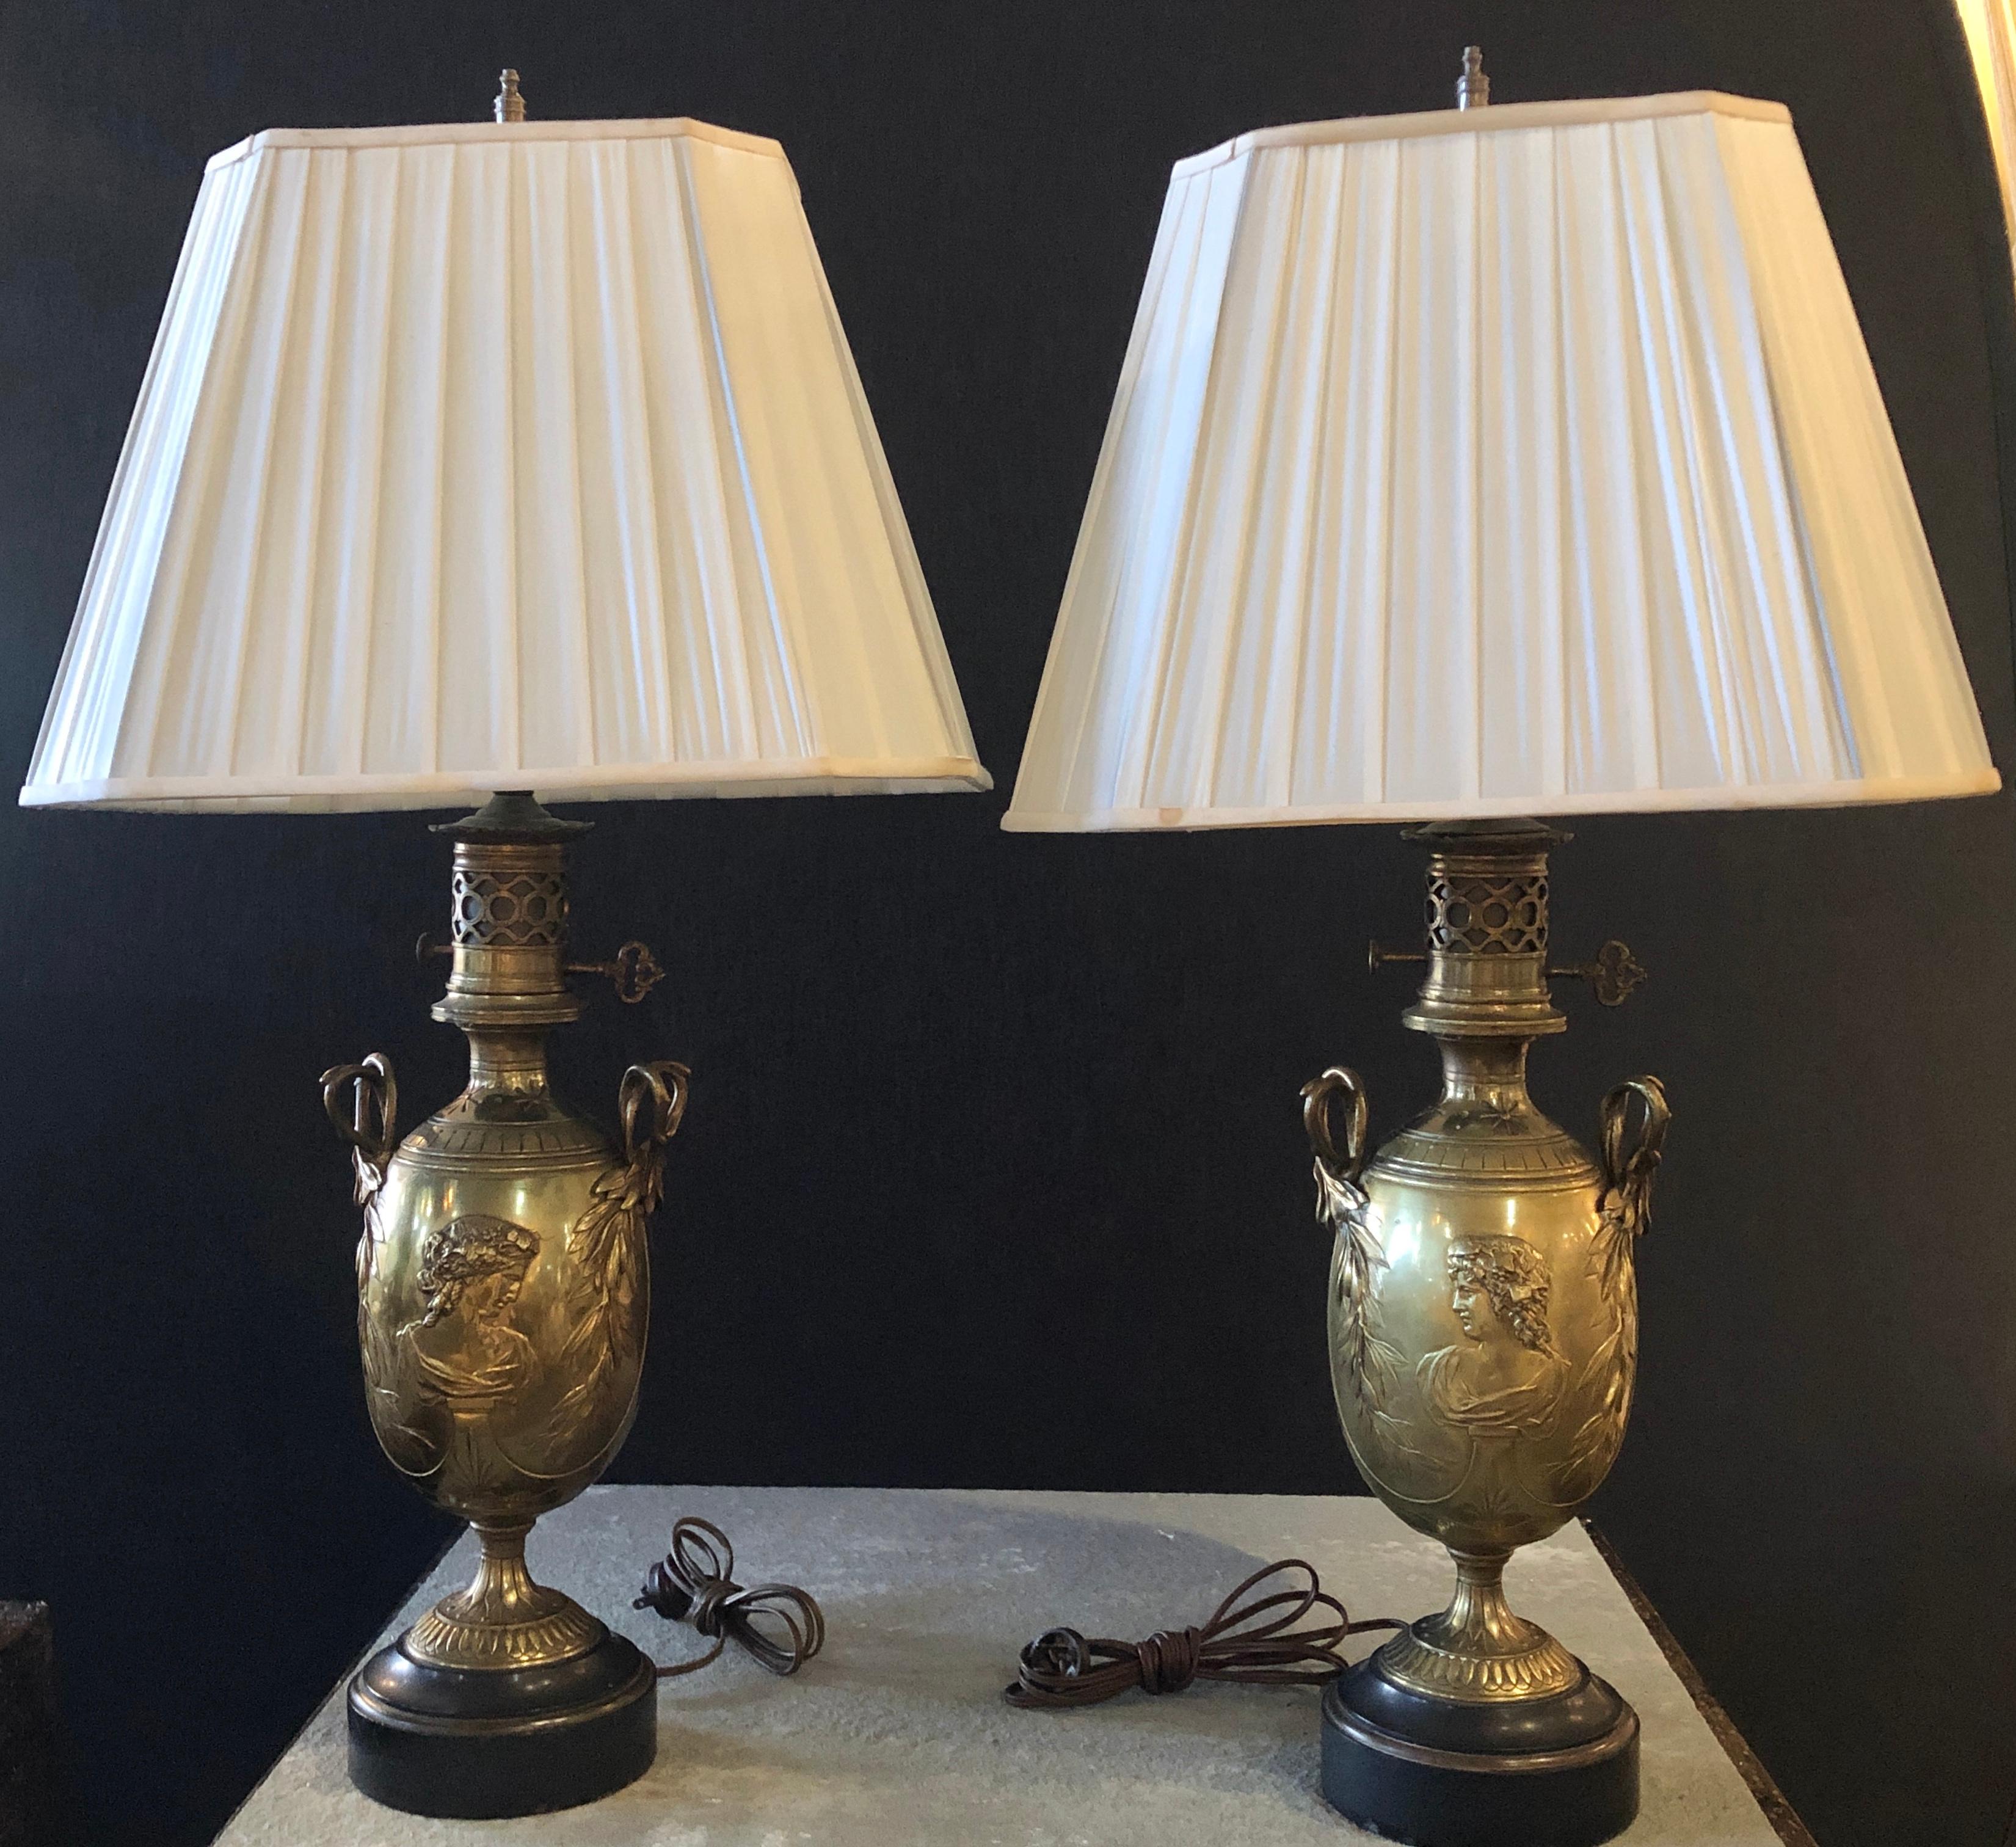 19th century urn shaped Grecian doré bronze table lamps. A pair of stunning oil converted table lamps depicting opposing female busts having fine details with flowing hair and shape. The reef inspired twin handled lamps show the style and flair of